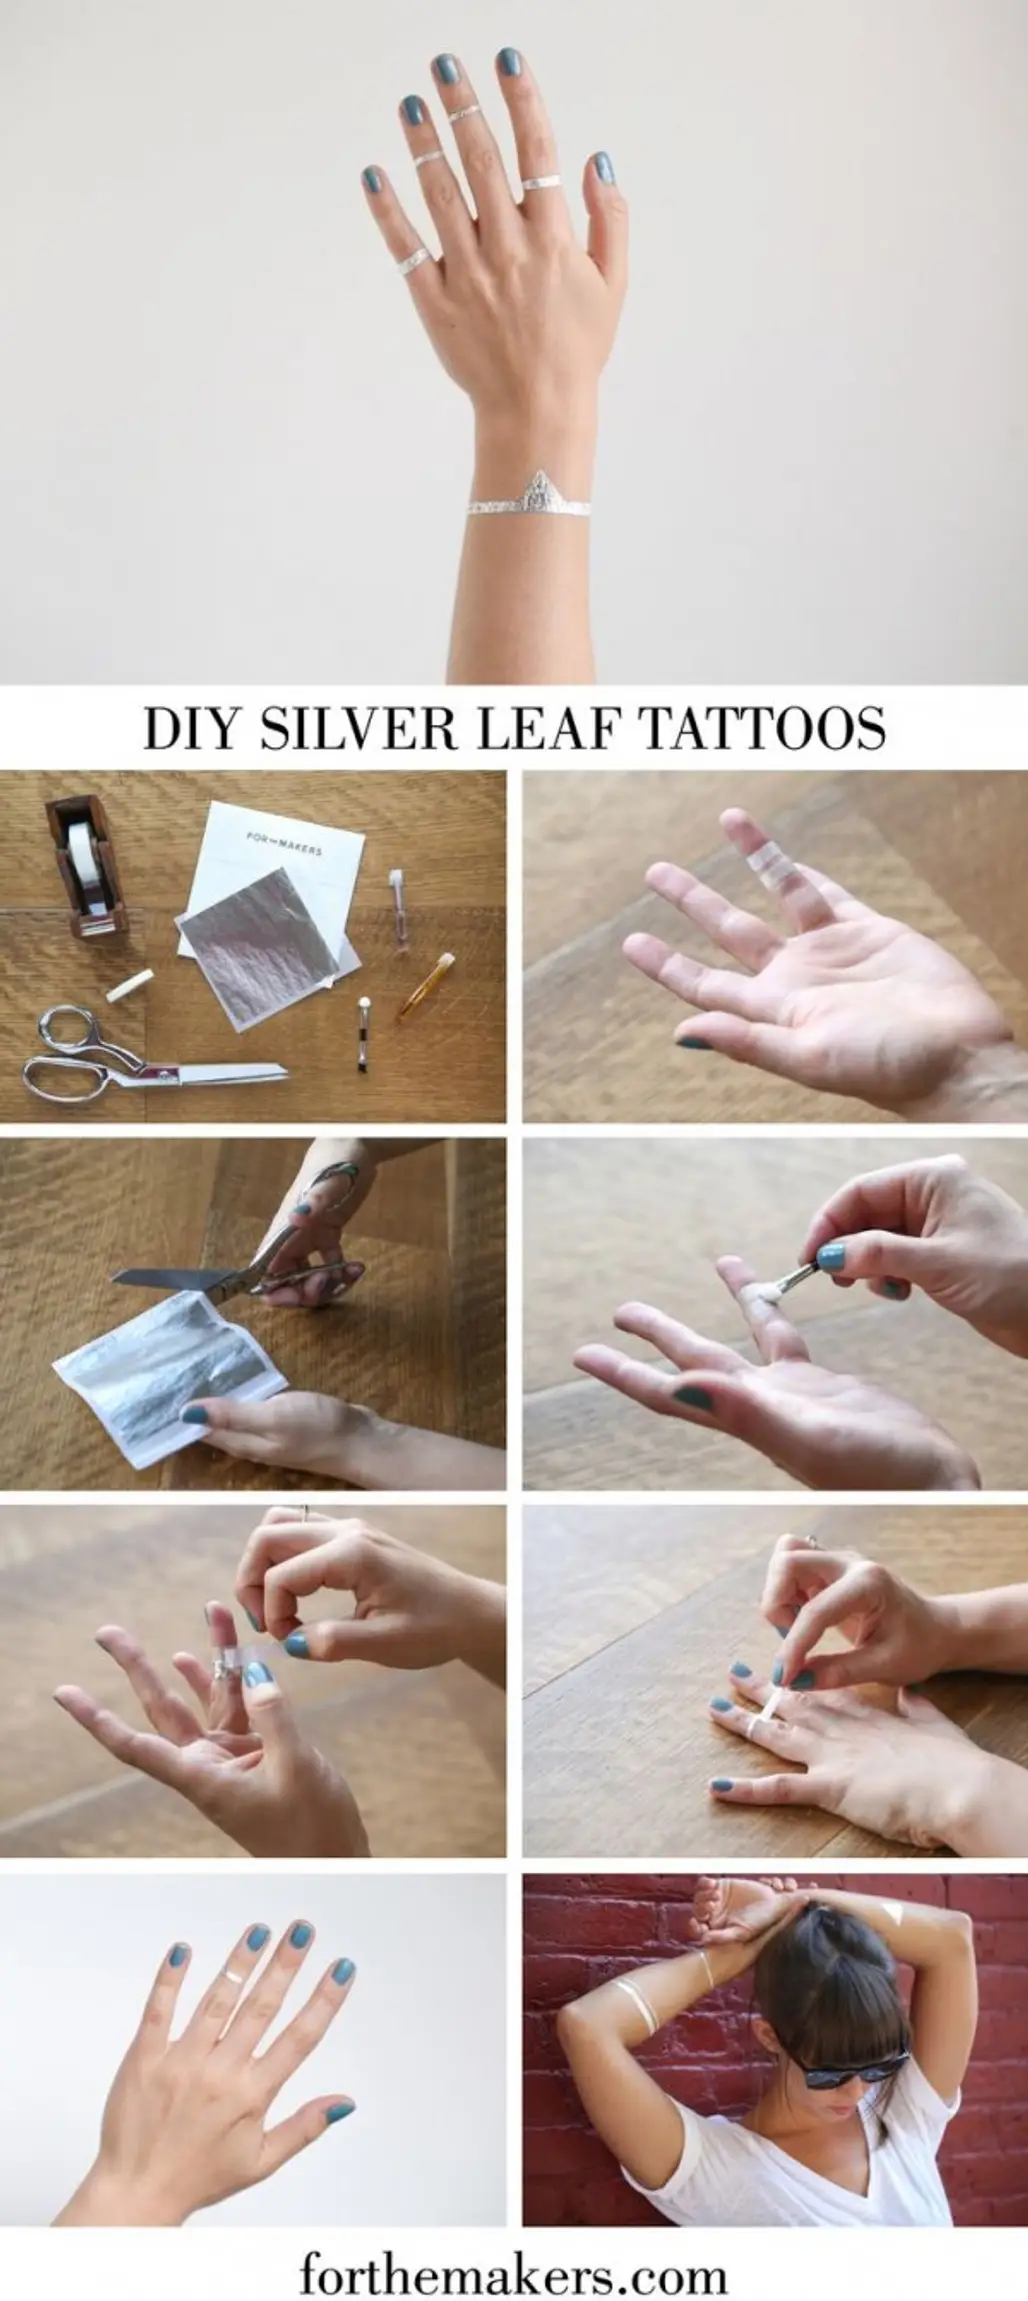 Make Your Own Metallic Tattoos with Silver Leaf or Gold Leaf!